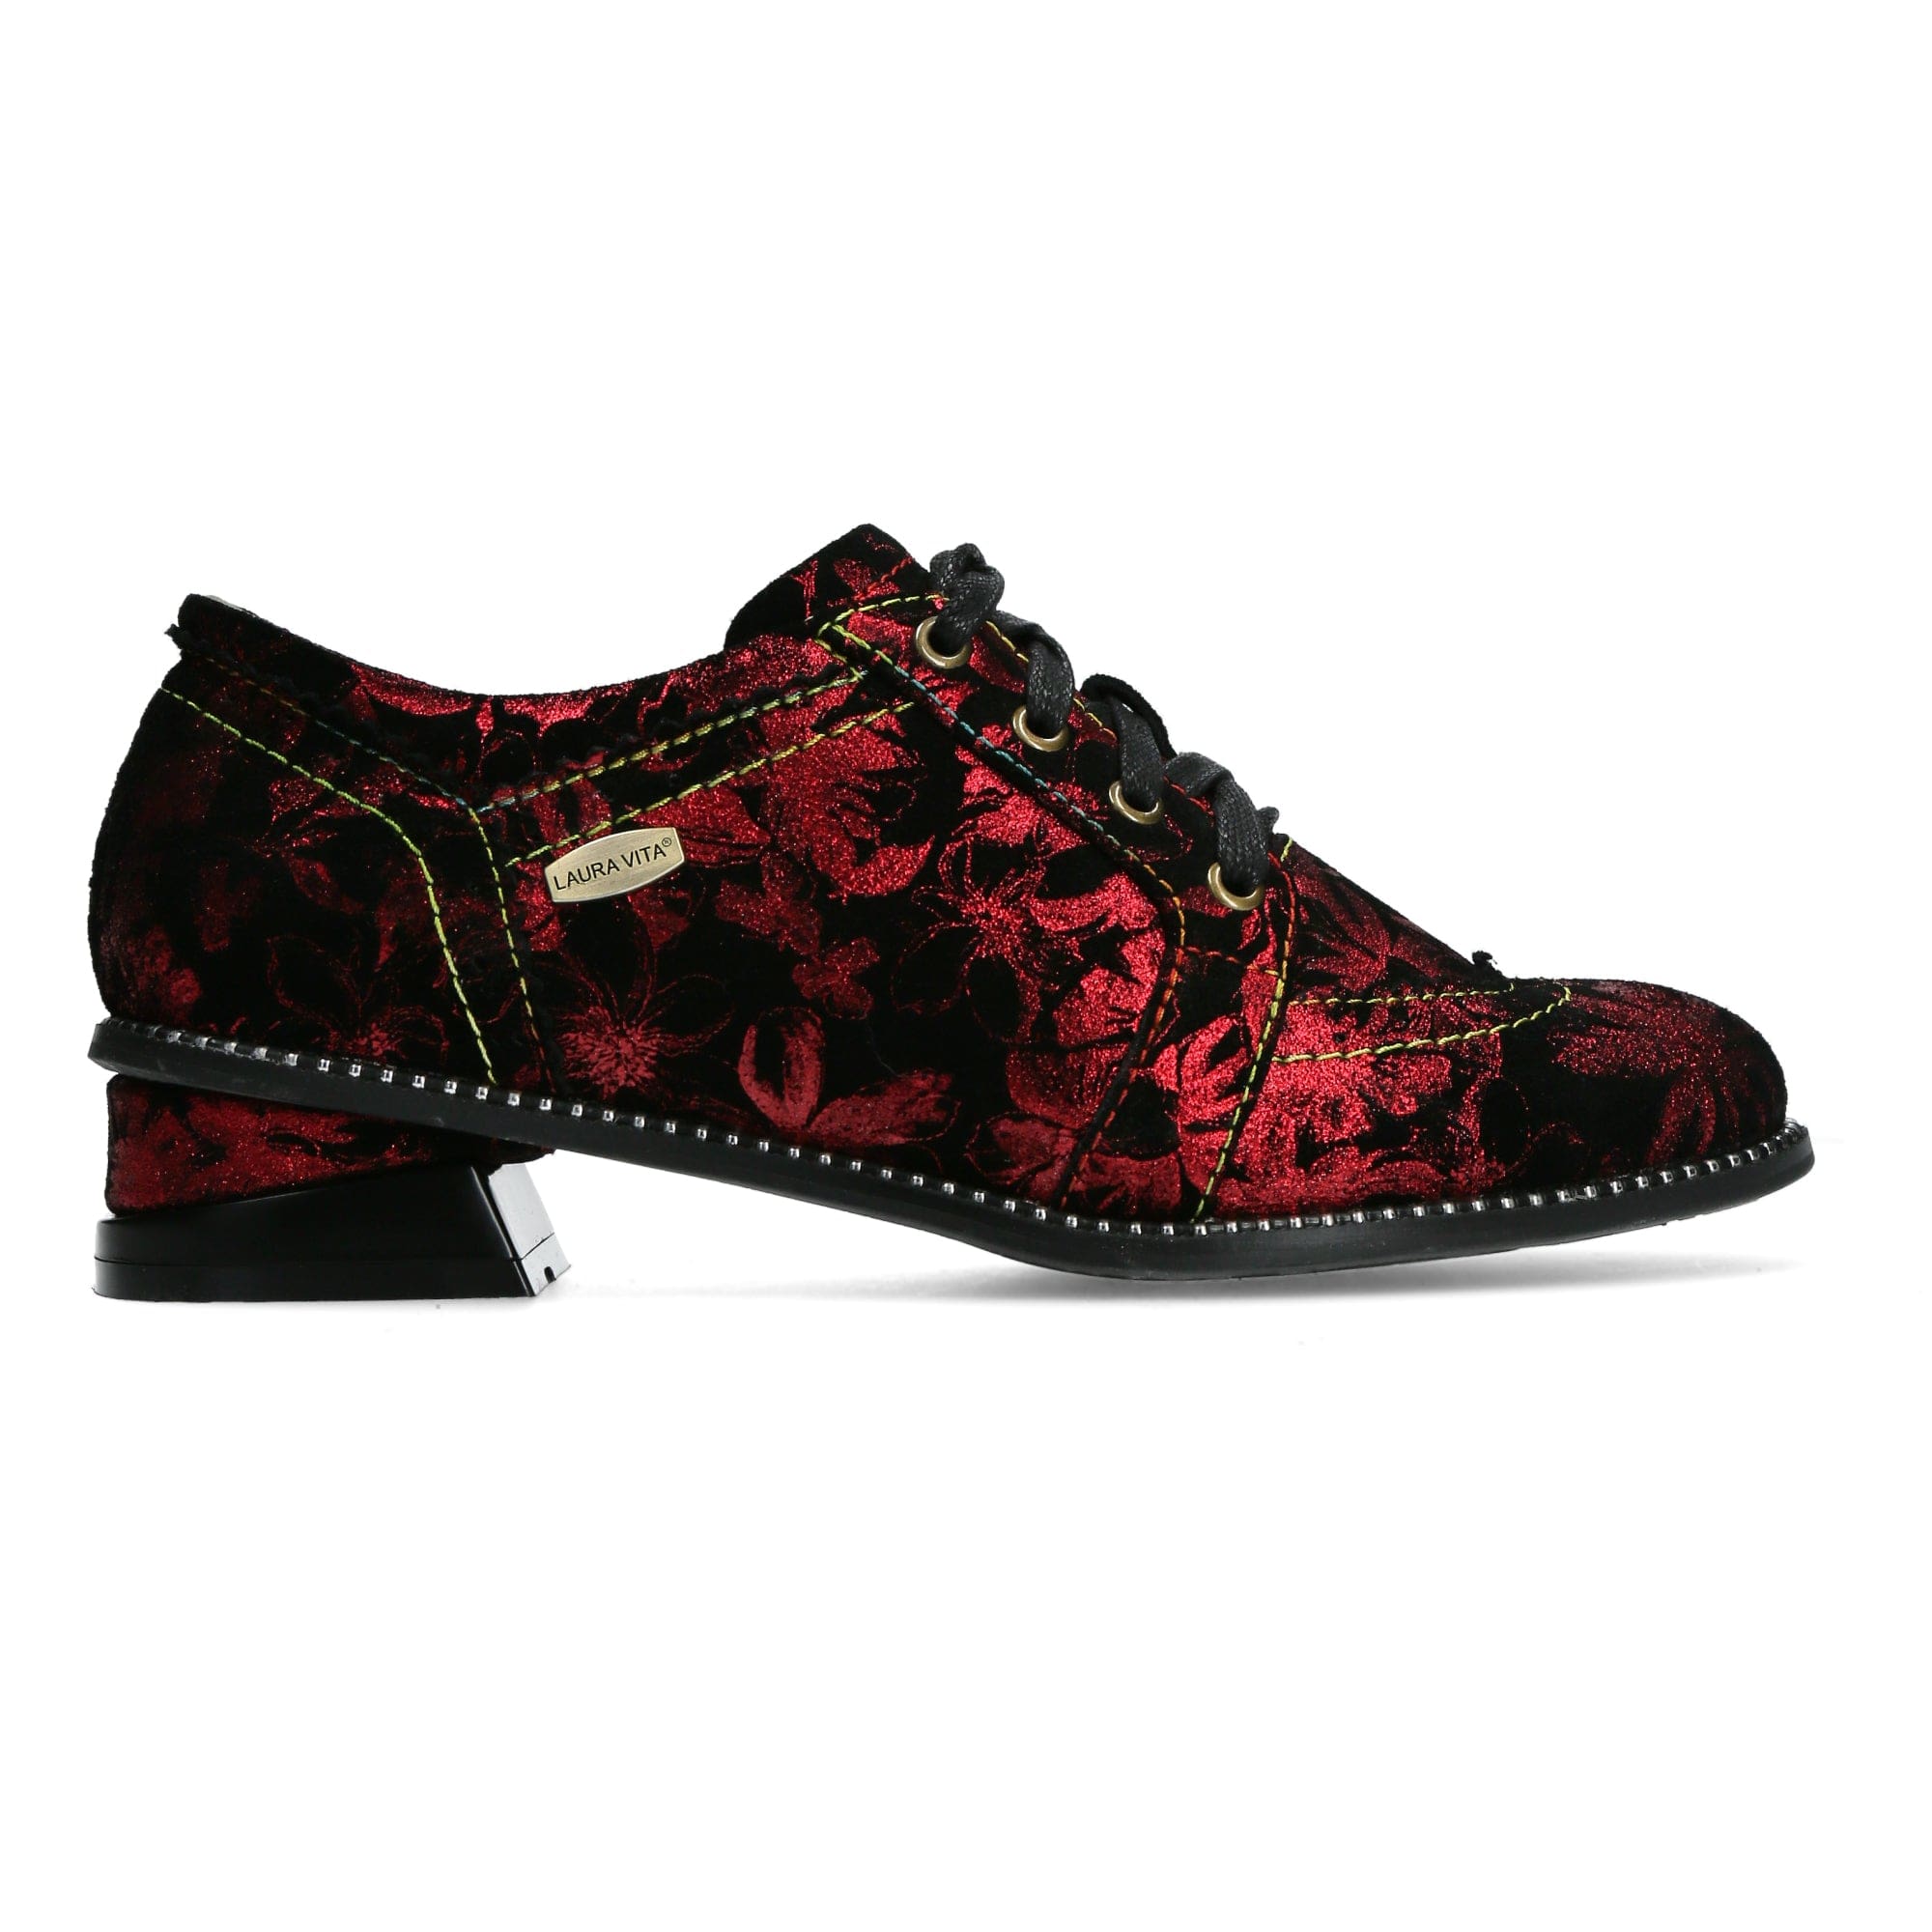 Schoen IBCIHALO 11 - 35 / Rood - Derby's